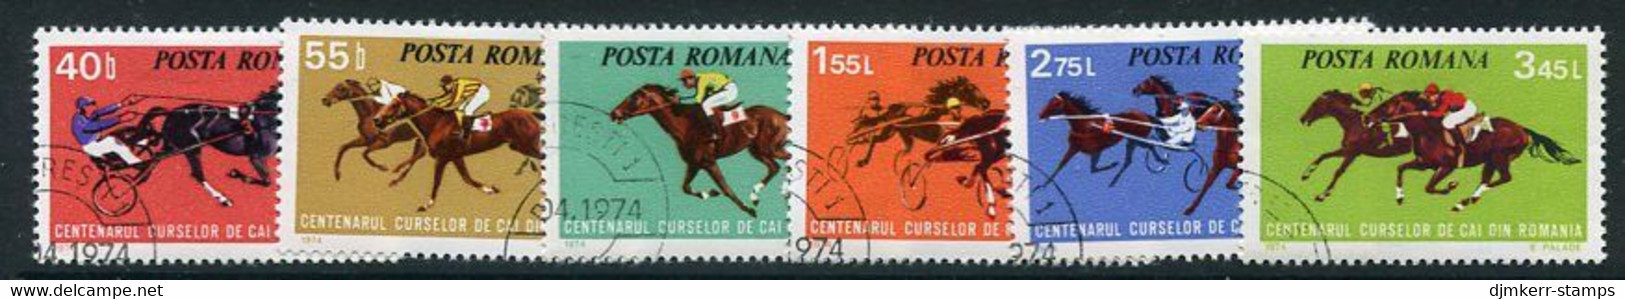 ROMANIA 1974 Horse Racing Used..  Michel 3182-87 - Used Stamps